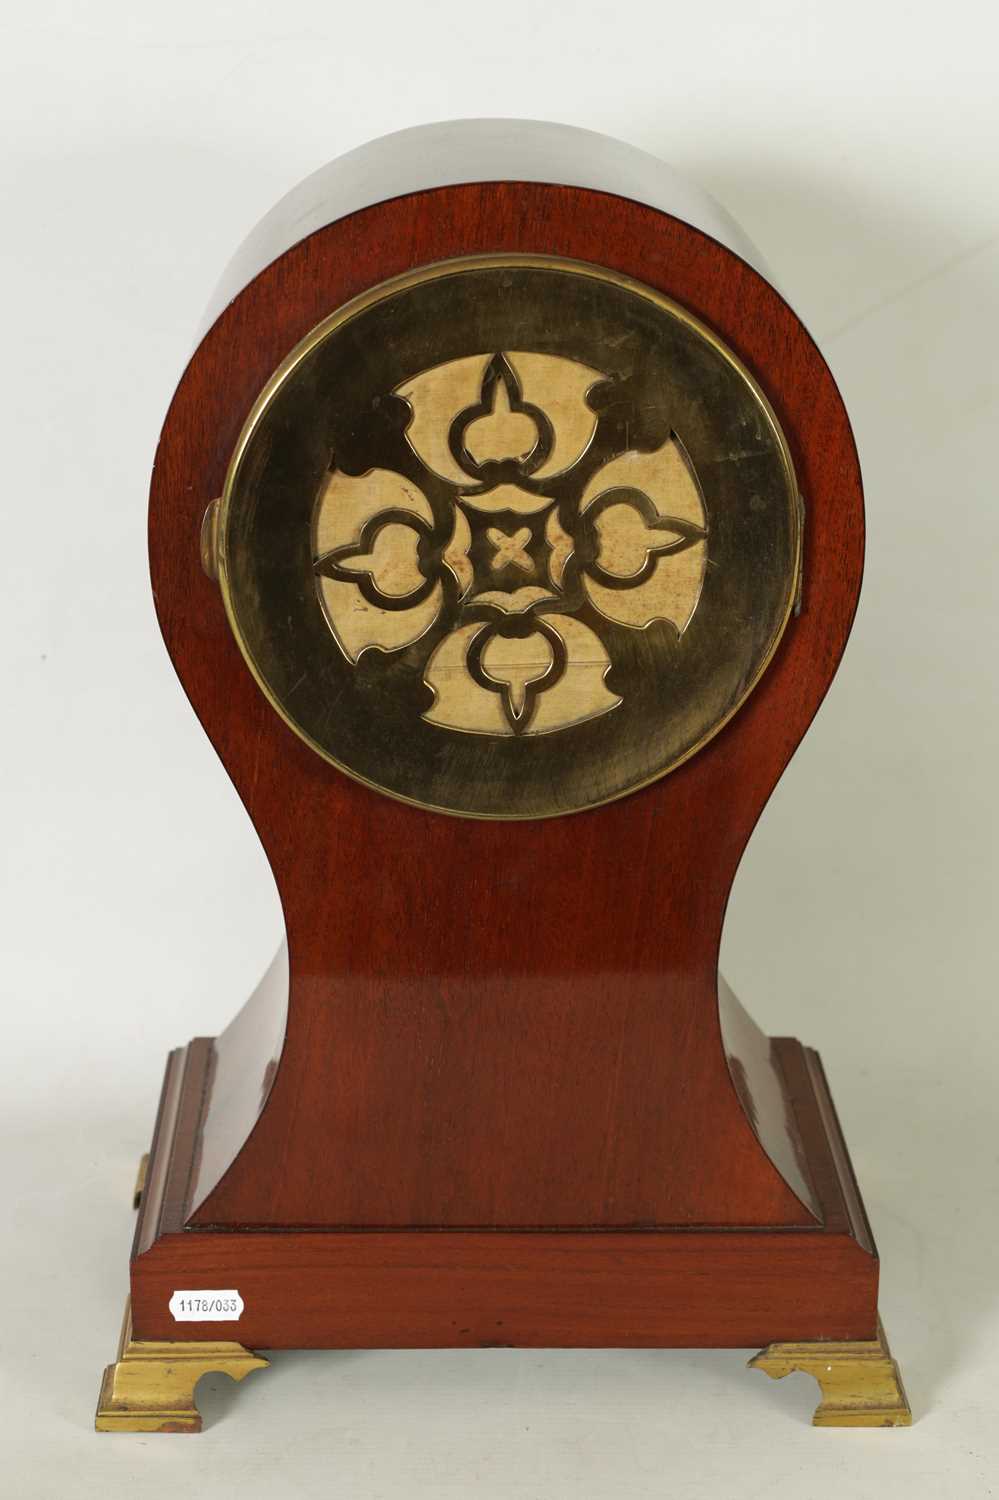 ARNOLD AND LEWIS, MANCHESTER. AN EDWARDIAN FRENCH INLAID MAHOGANY BRACKET CLOCK - Image 4 of 8